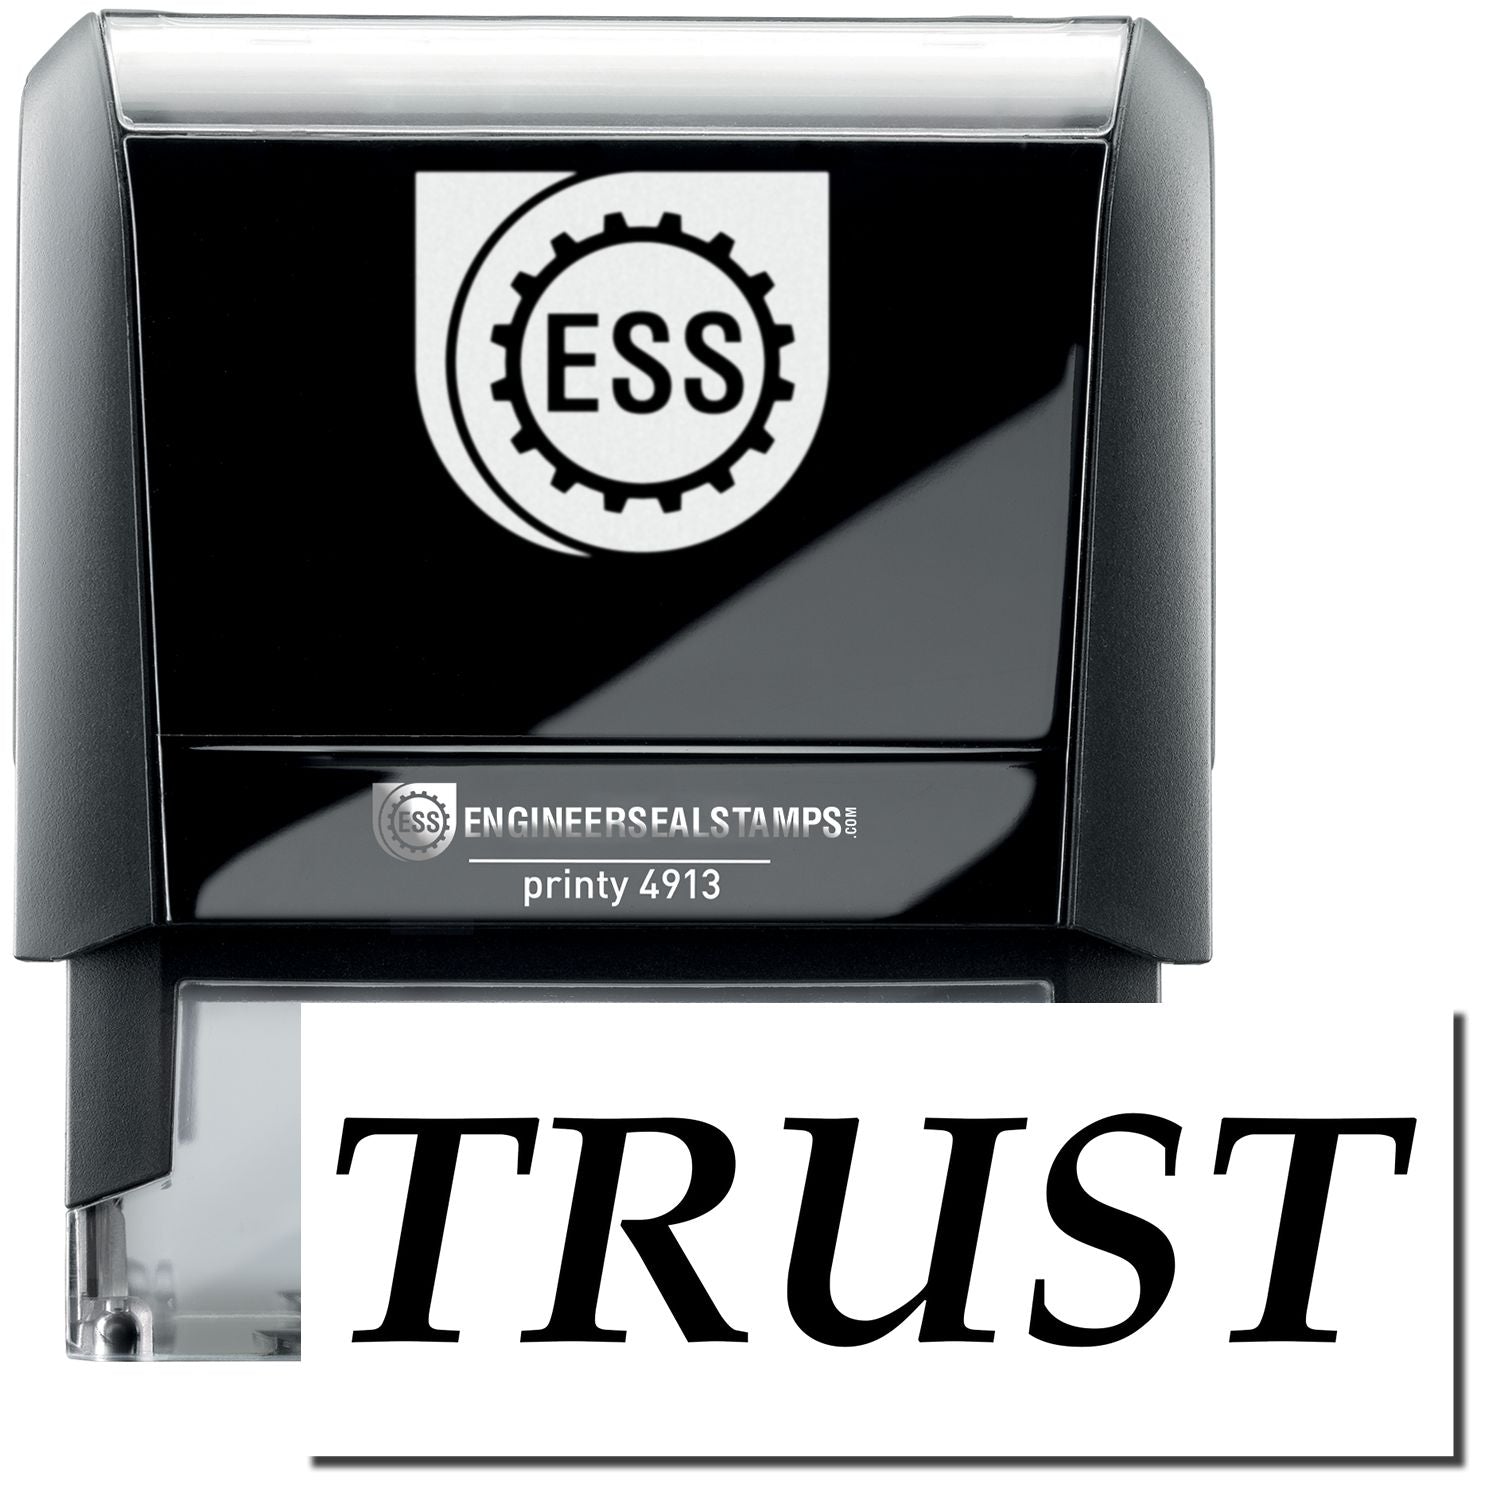 A self-inking stamp with a stamped image showing how the text "TRUST" in a large bold font is displayed by it.